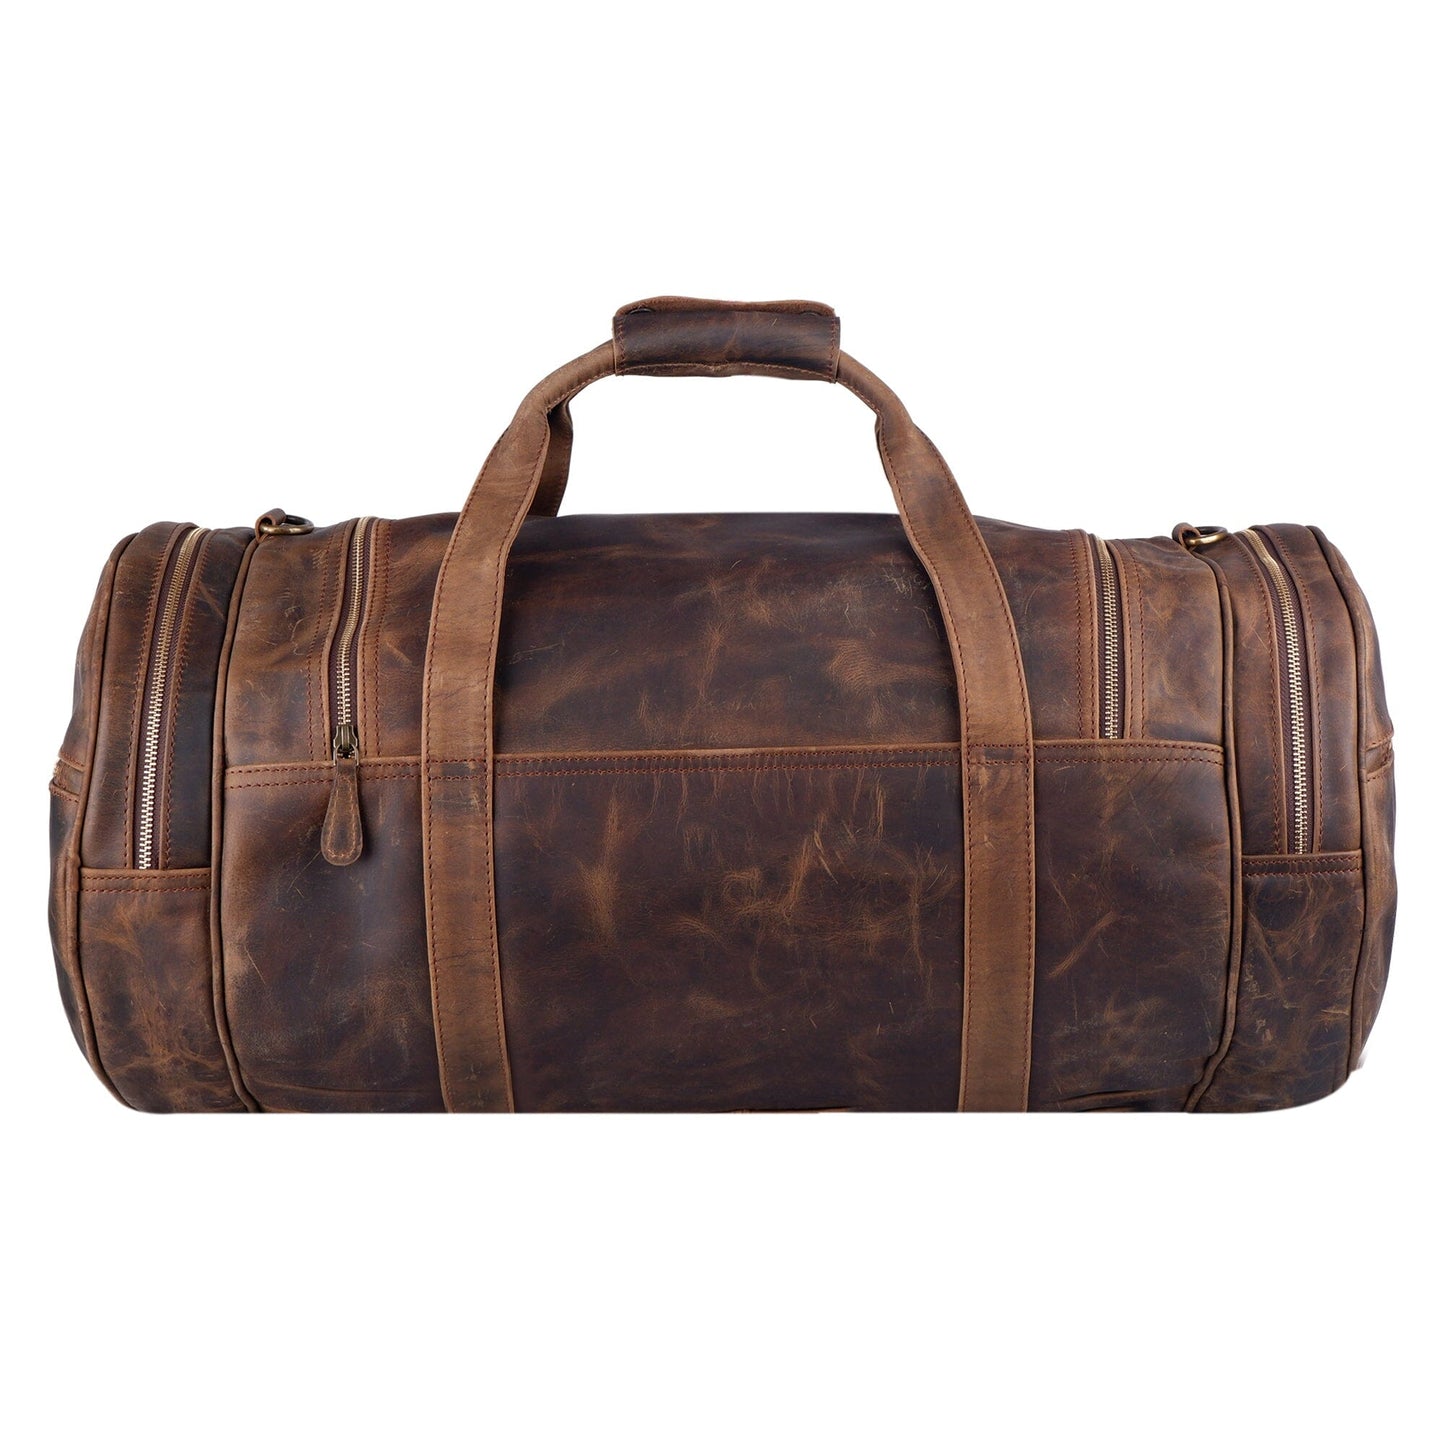 Textured Carter Duffel - The Tool Store